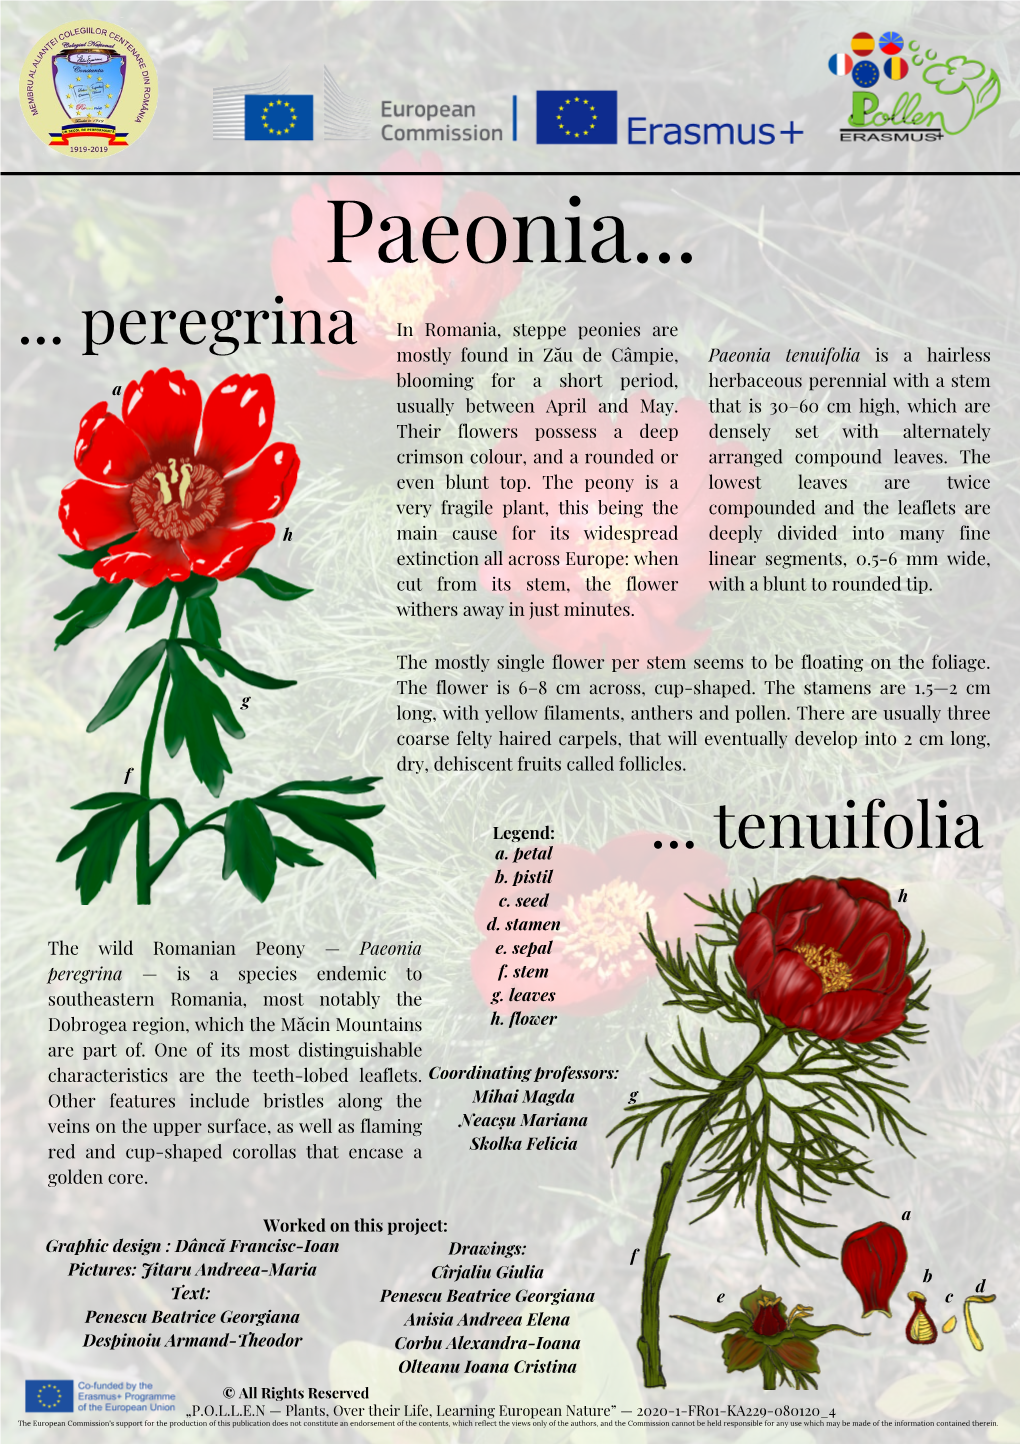 Paeonia Tenuifolia Is a Hairless Herbaceous Perennial with a Stem